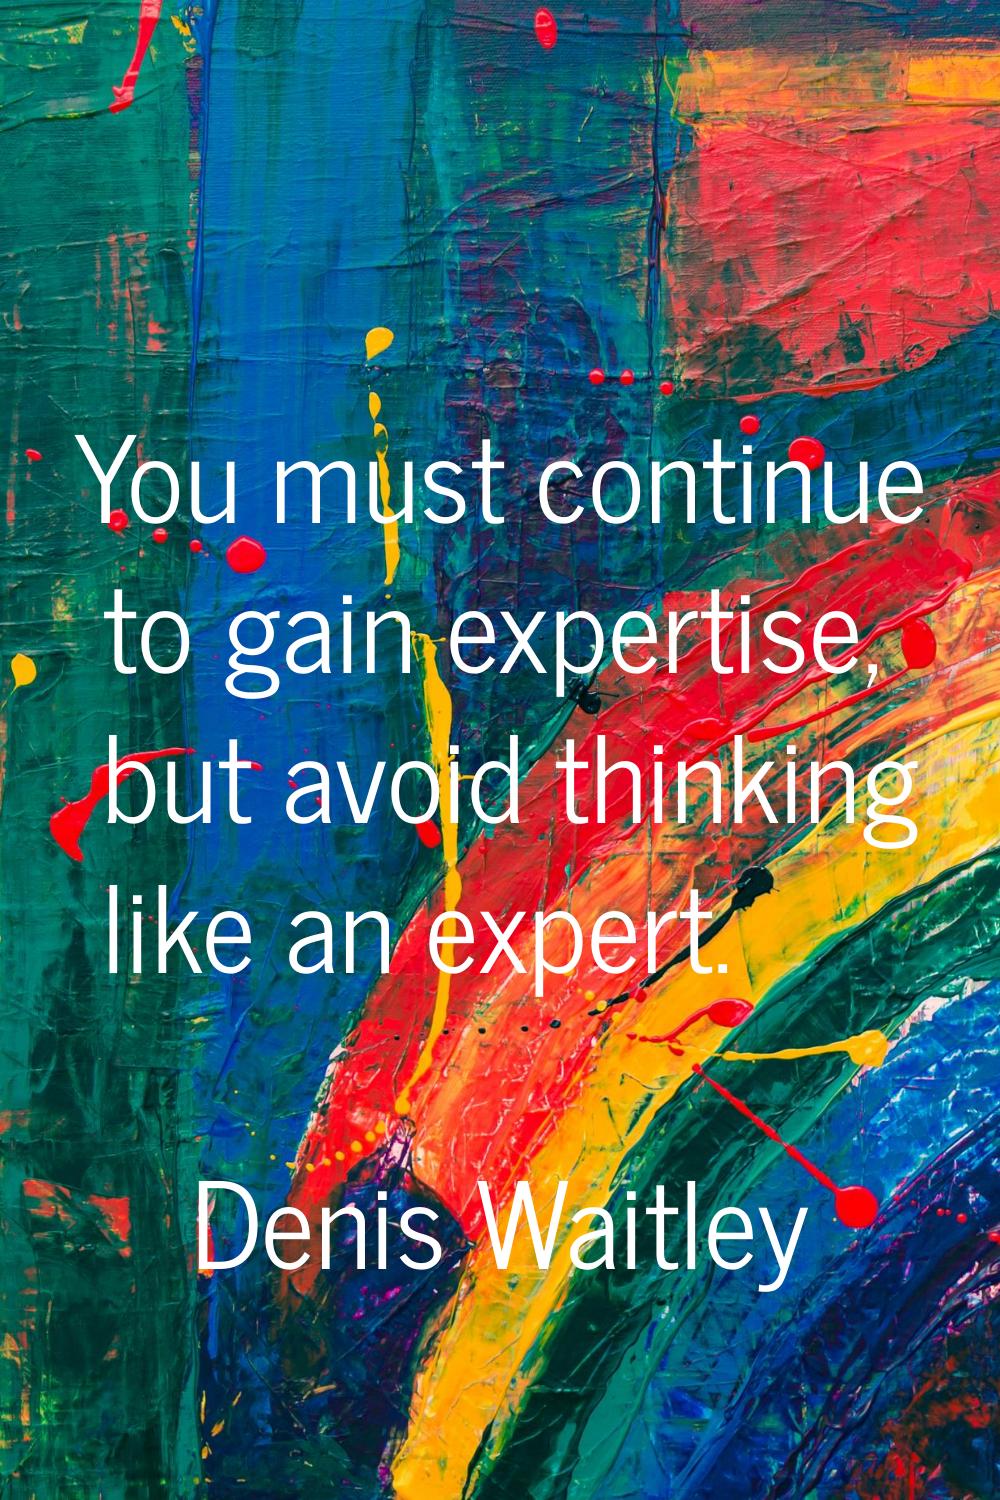 You must continue to gain expertise, but avoid thinking like an expert.